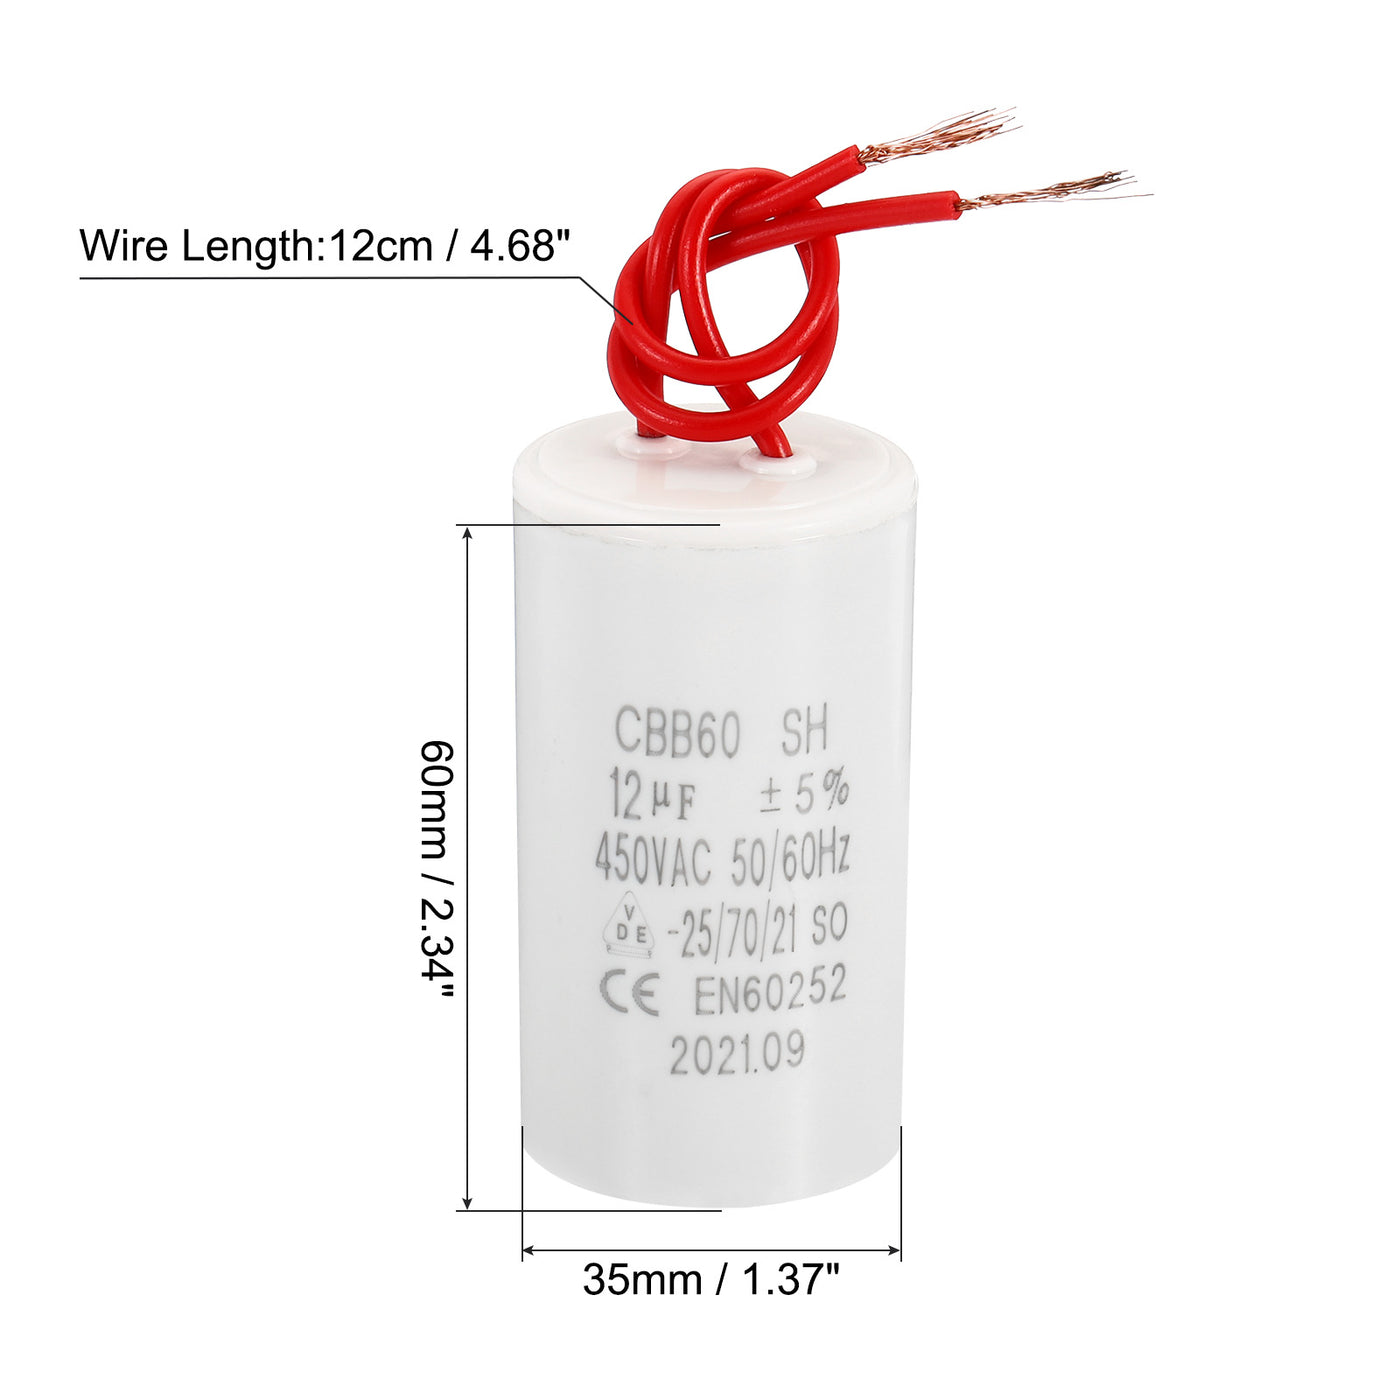 Harfington CBB60 12uF Run Capacitor,3Pcs AC450V 50/60Hz with 2 Wires 12cm for Water Pump